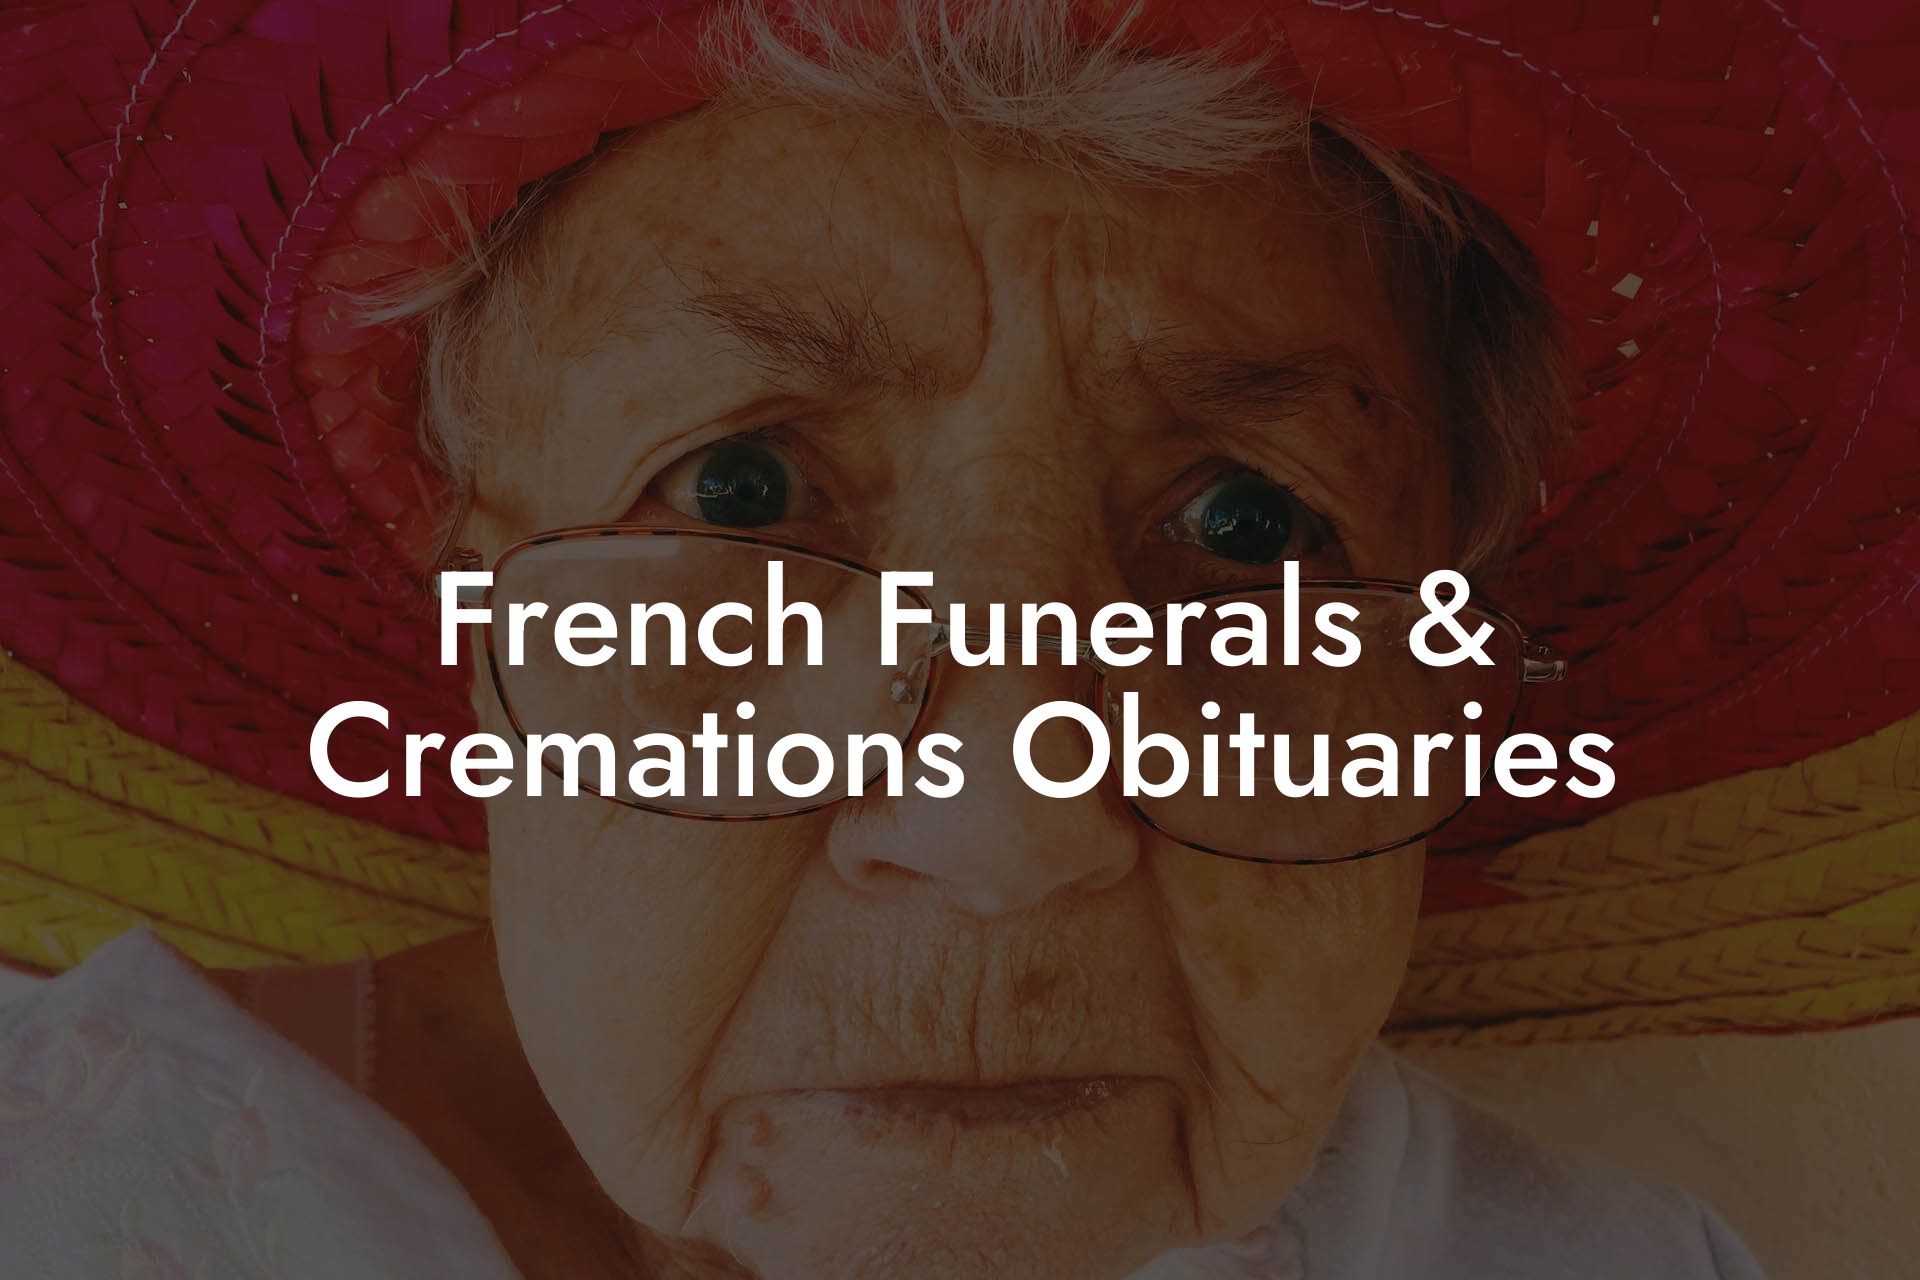 French Funerals & Cremations Obituaries